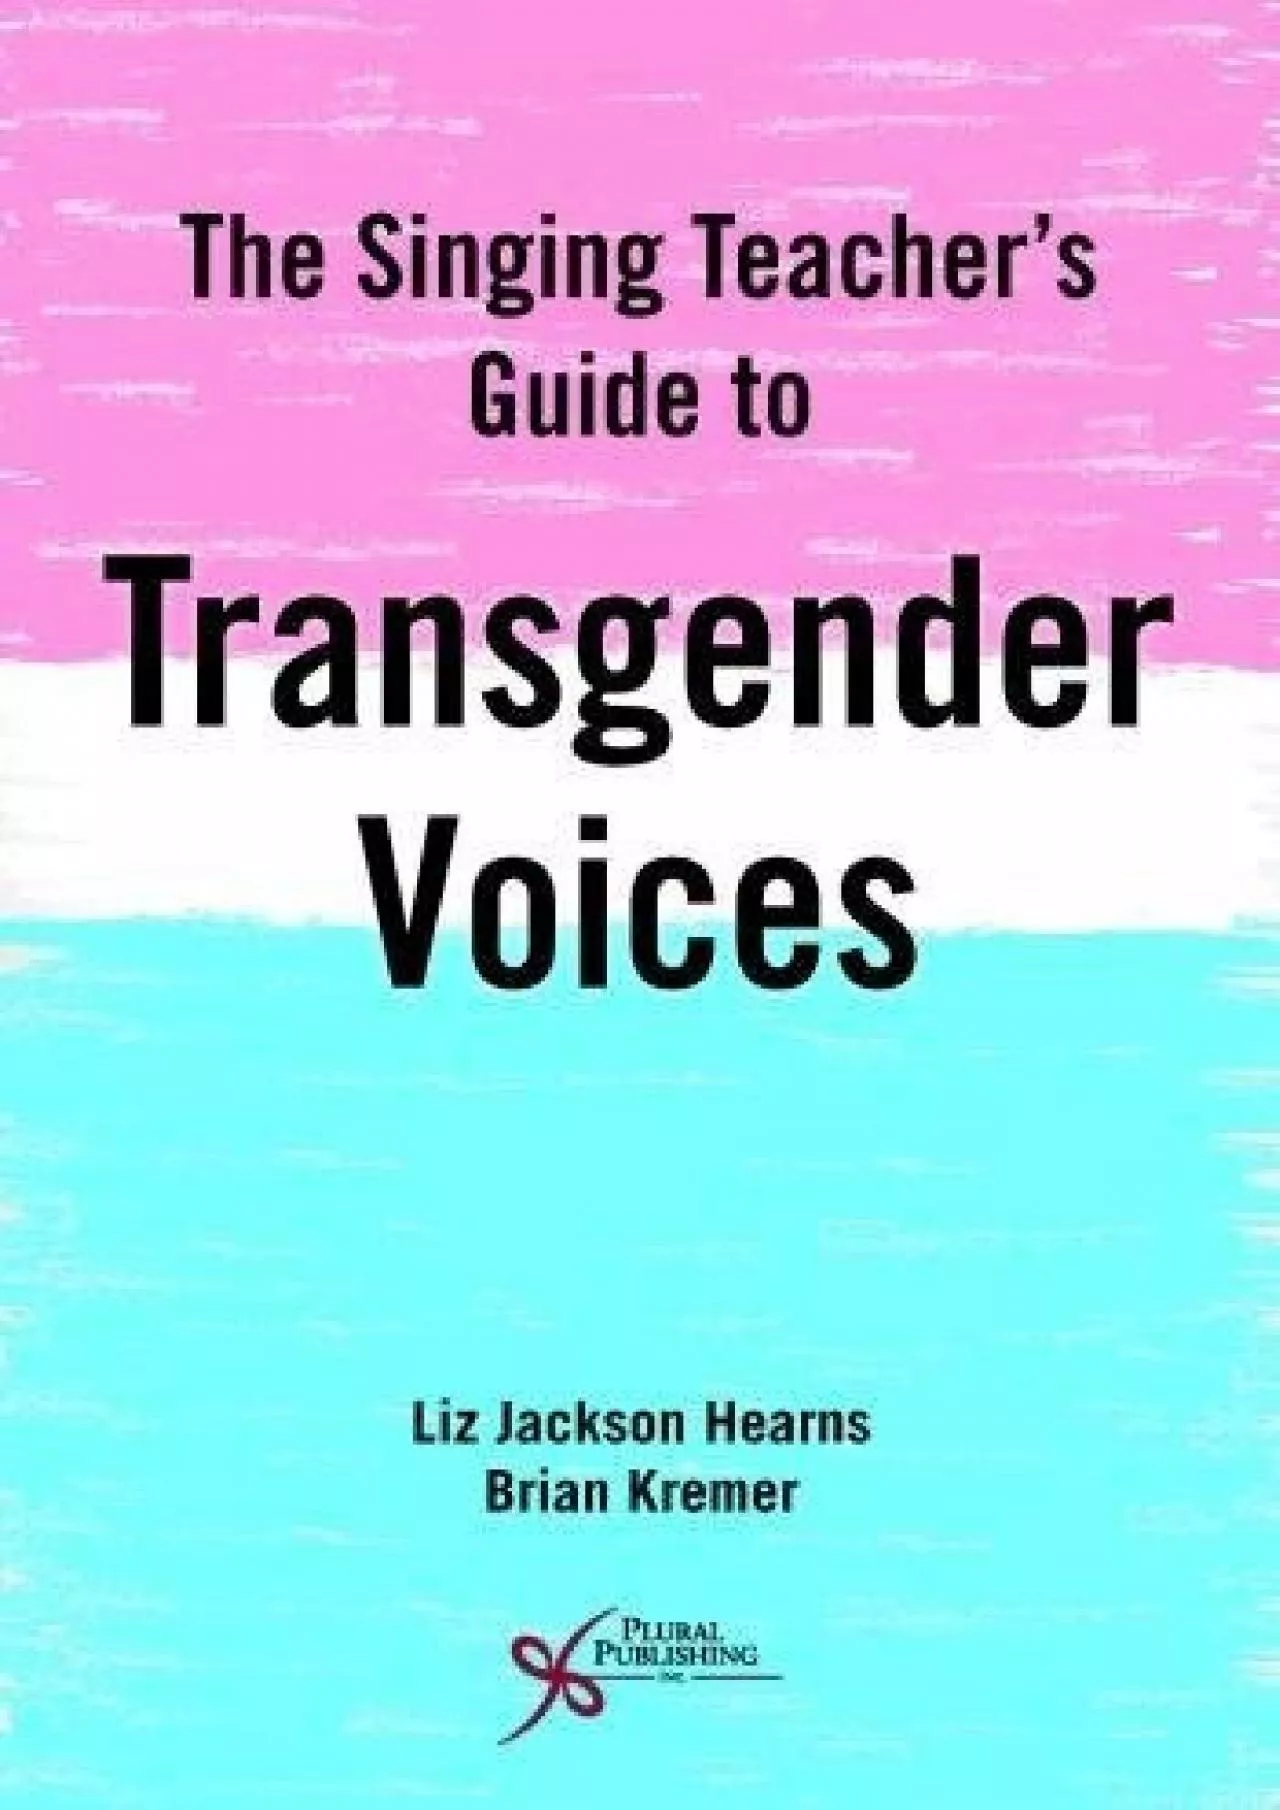 (BOOK)-The Singing Teacher\'s Guide to Transgender Voices